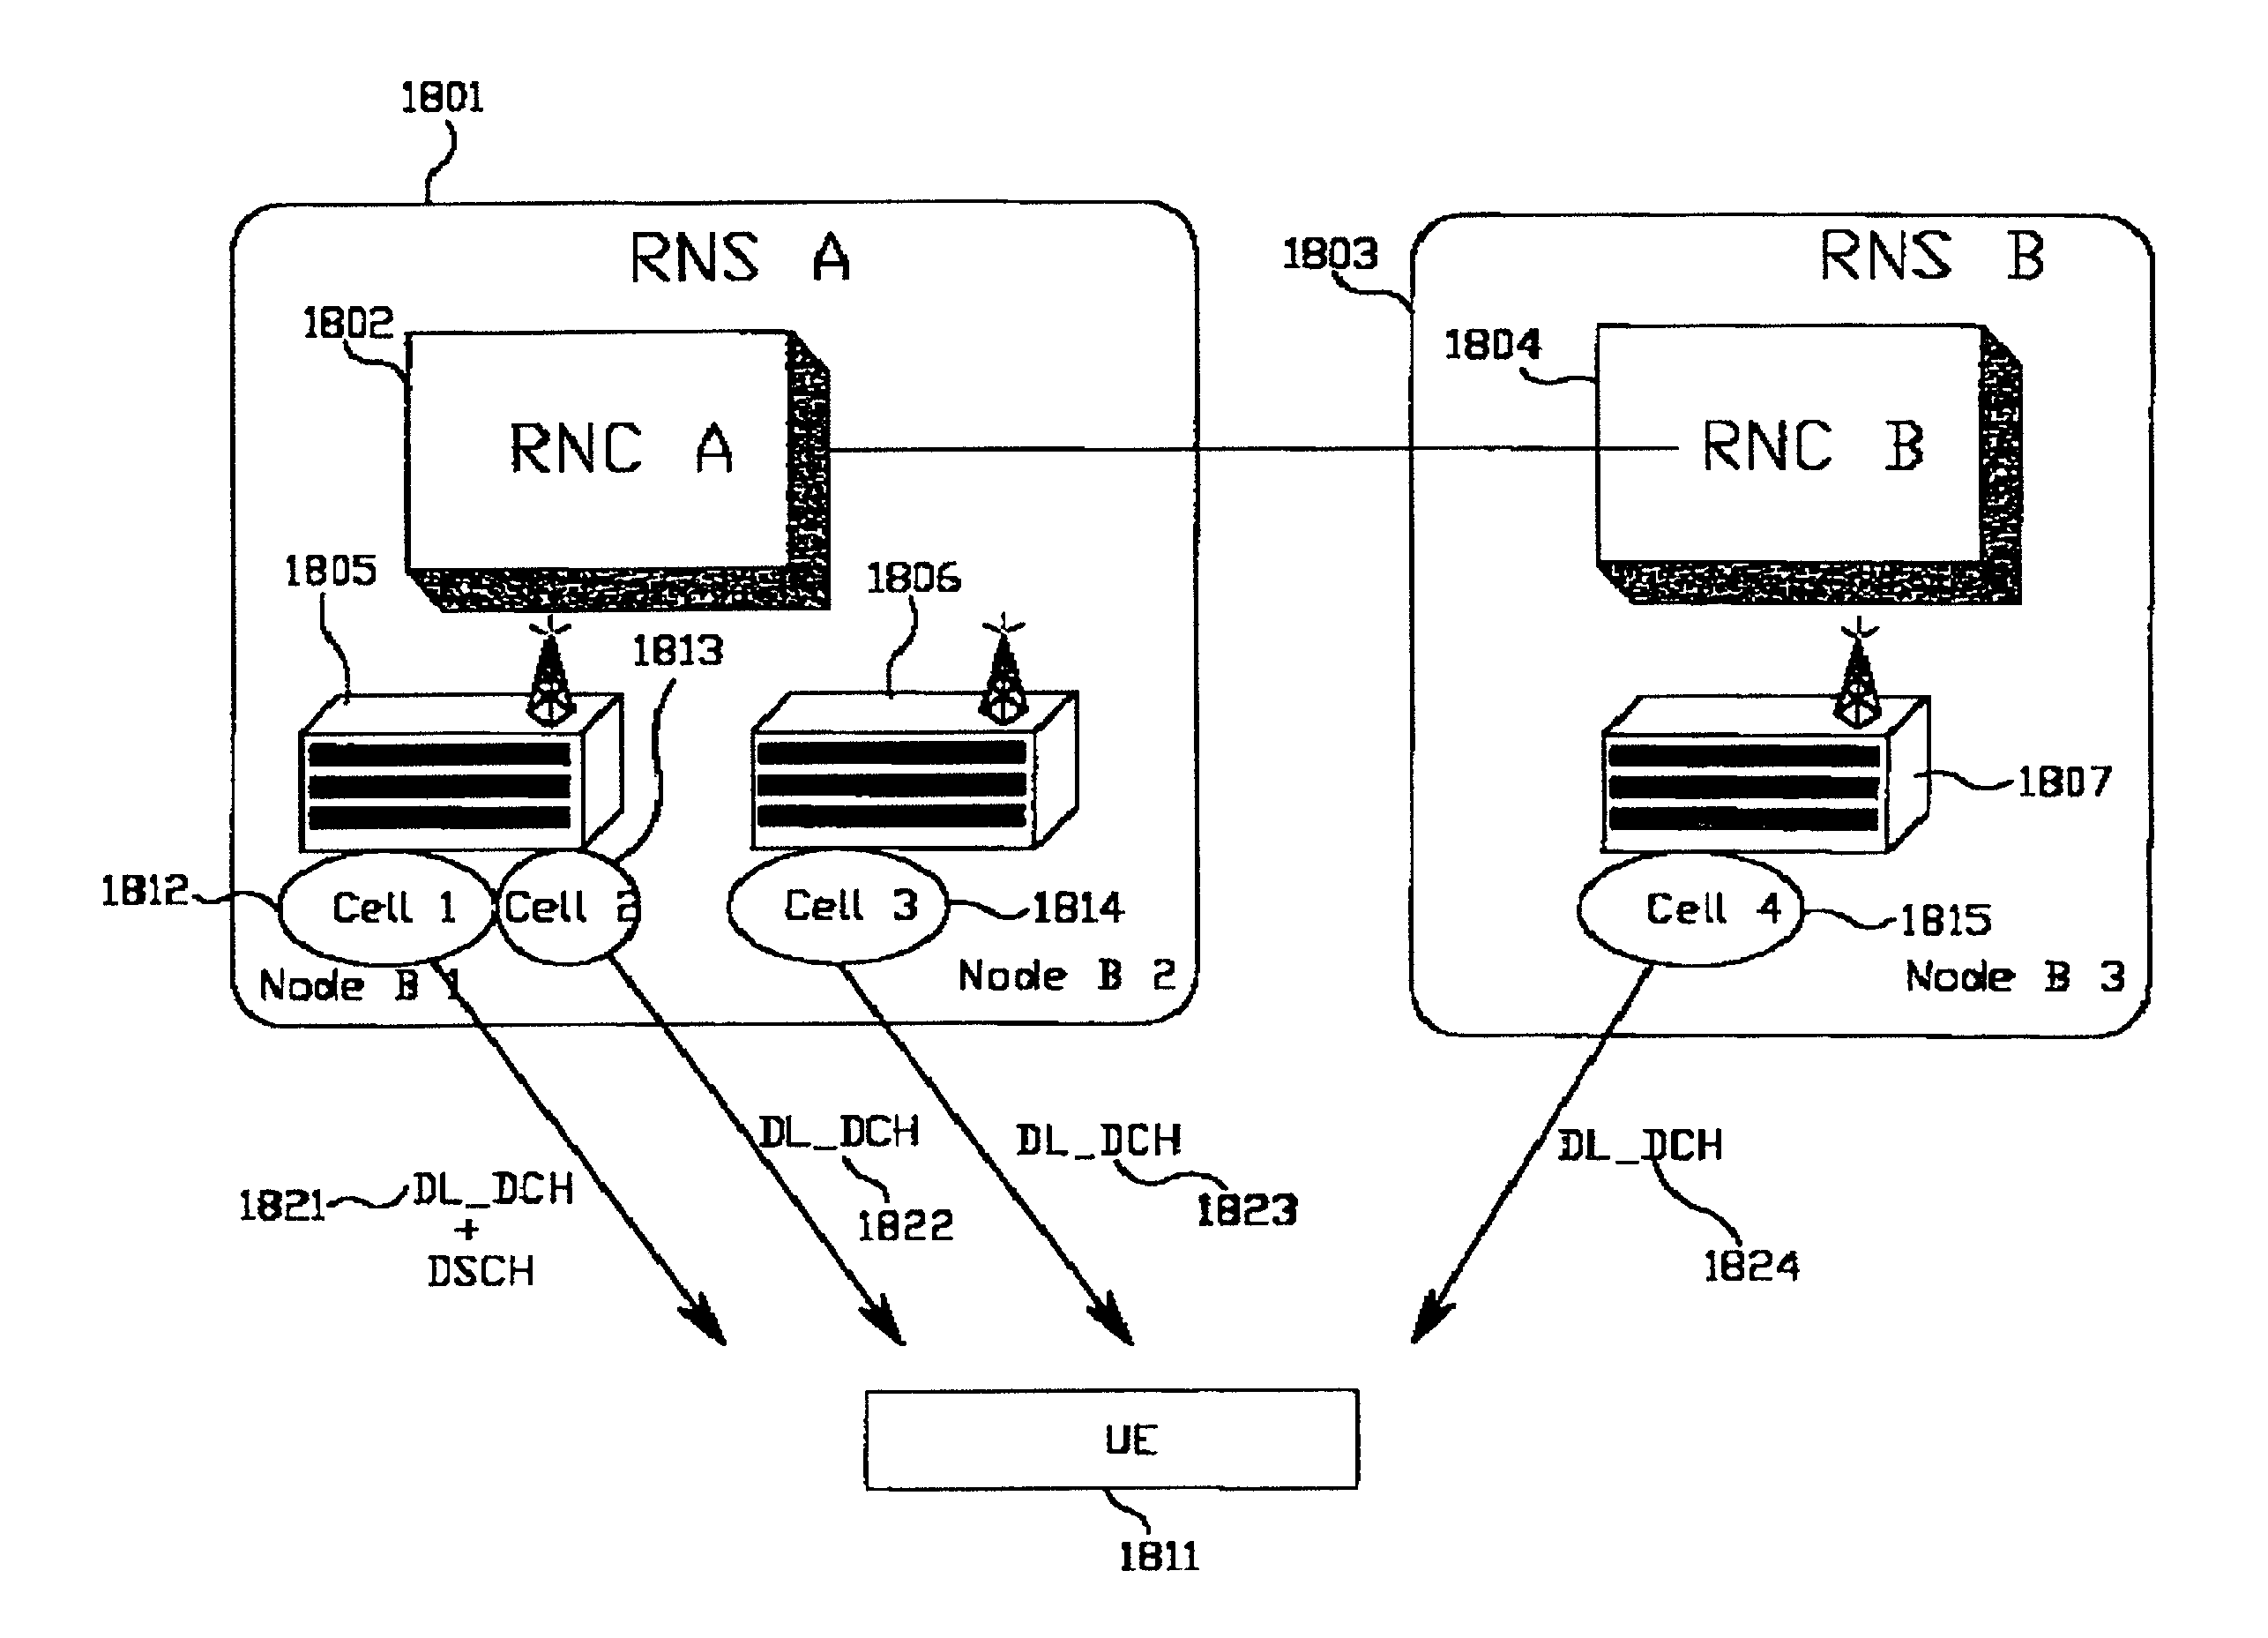 Apparatus and method for transmitting TFCI used for DSCH in a W-CDMA mobile communication system